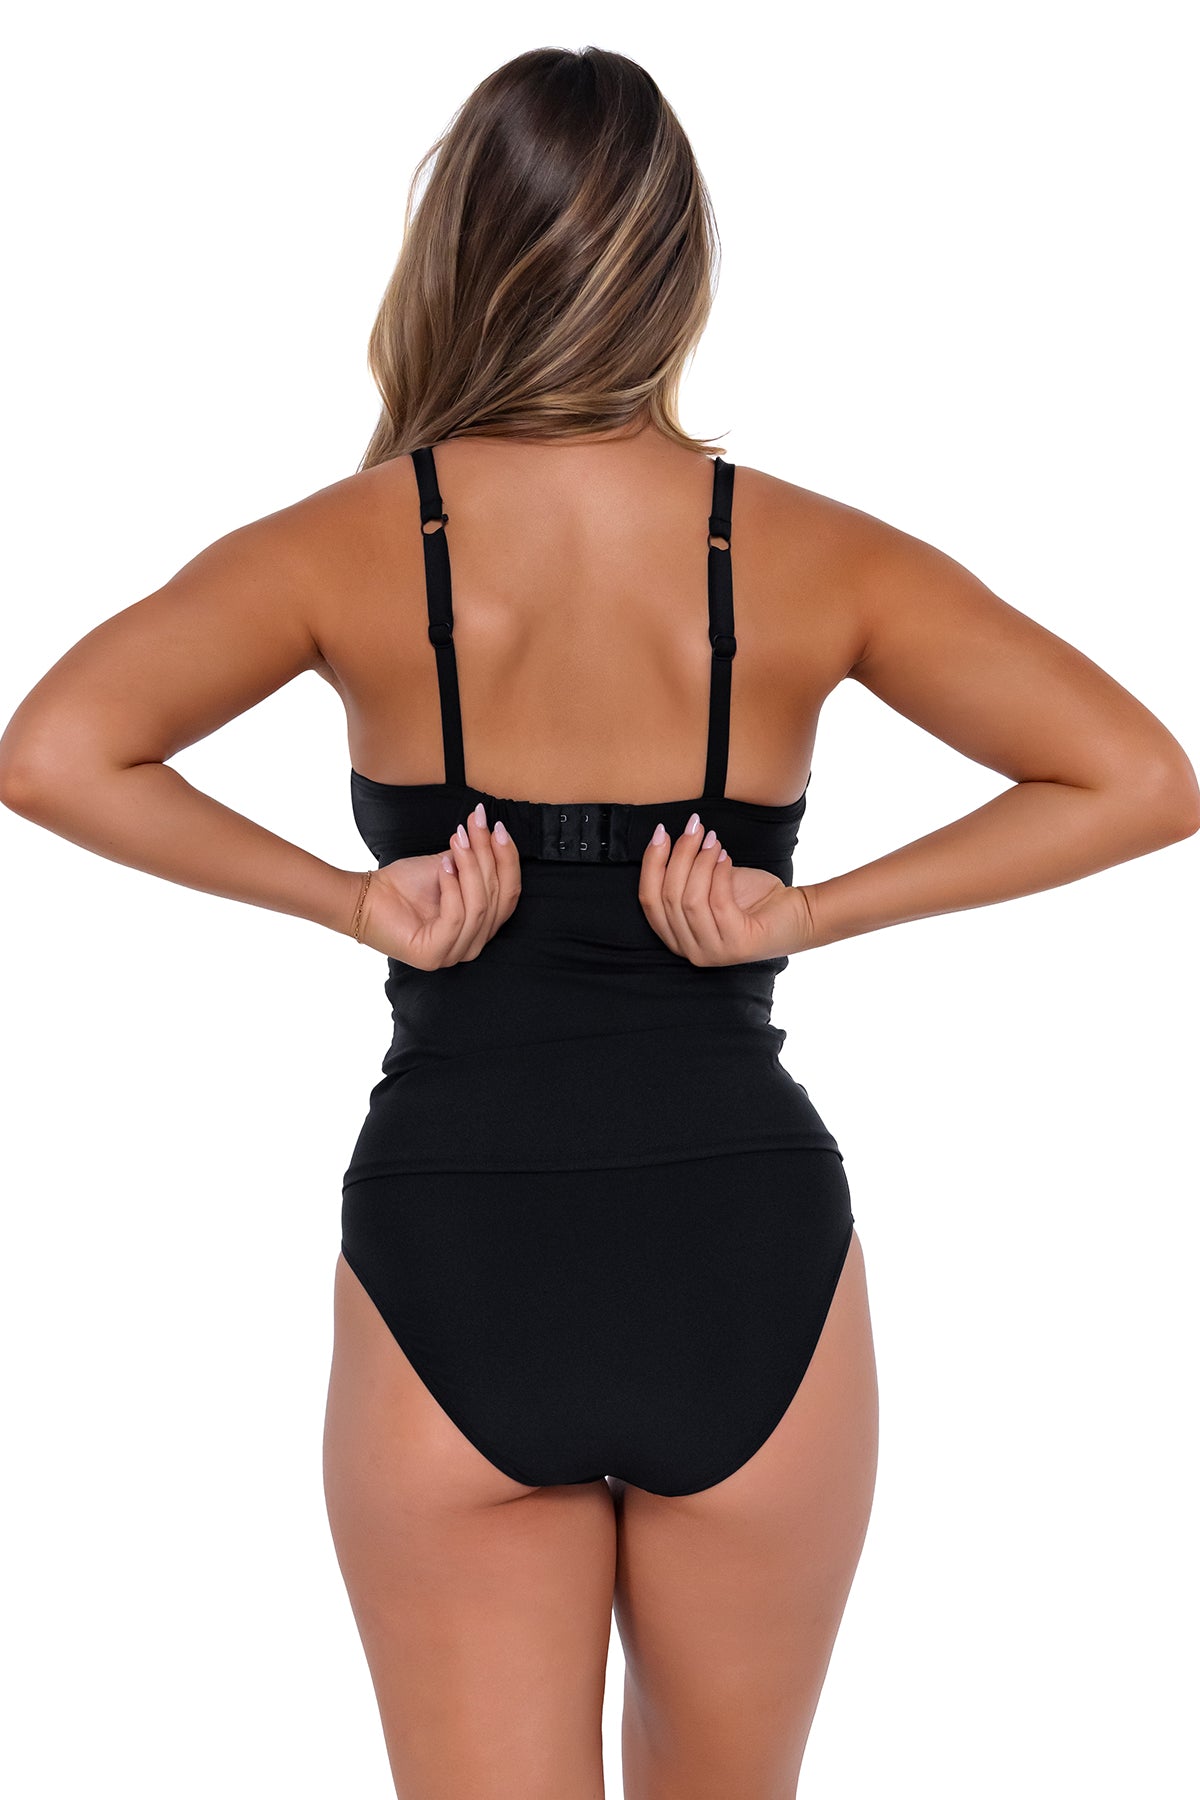 Back pose #1 of Taylor wearing Sunsets Black Serena Tankini Top showing hidden hook-and-eye closure with matching High Road Bottom bikini